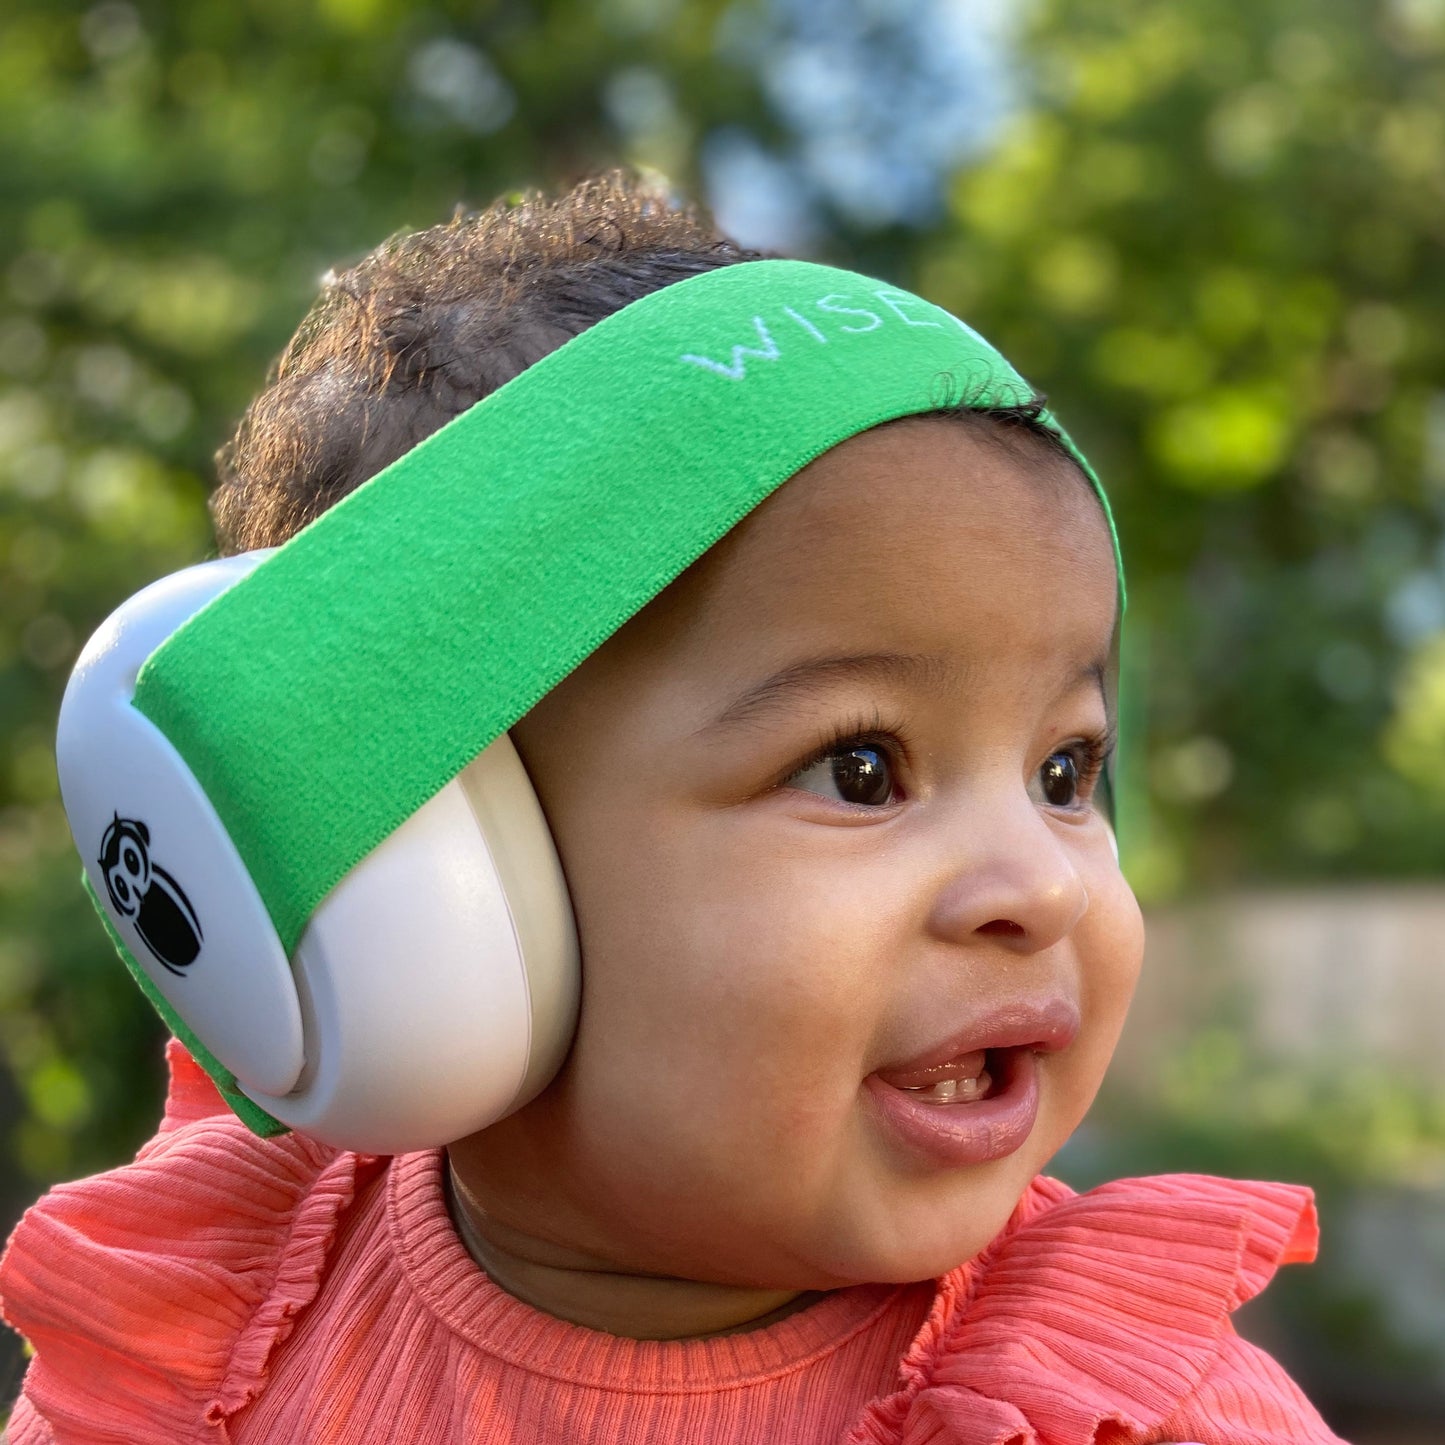 baby wearing hearing protection with green band